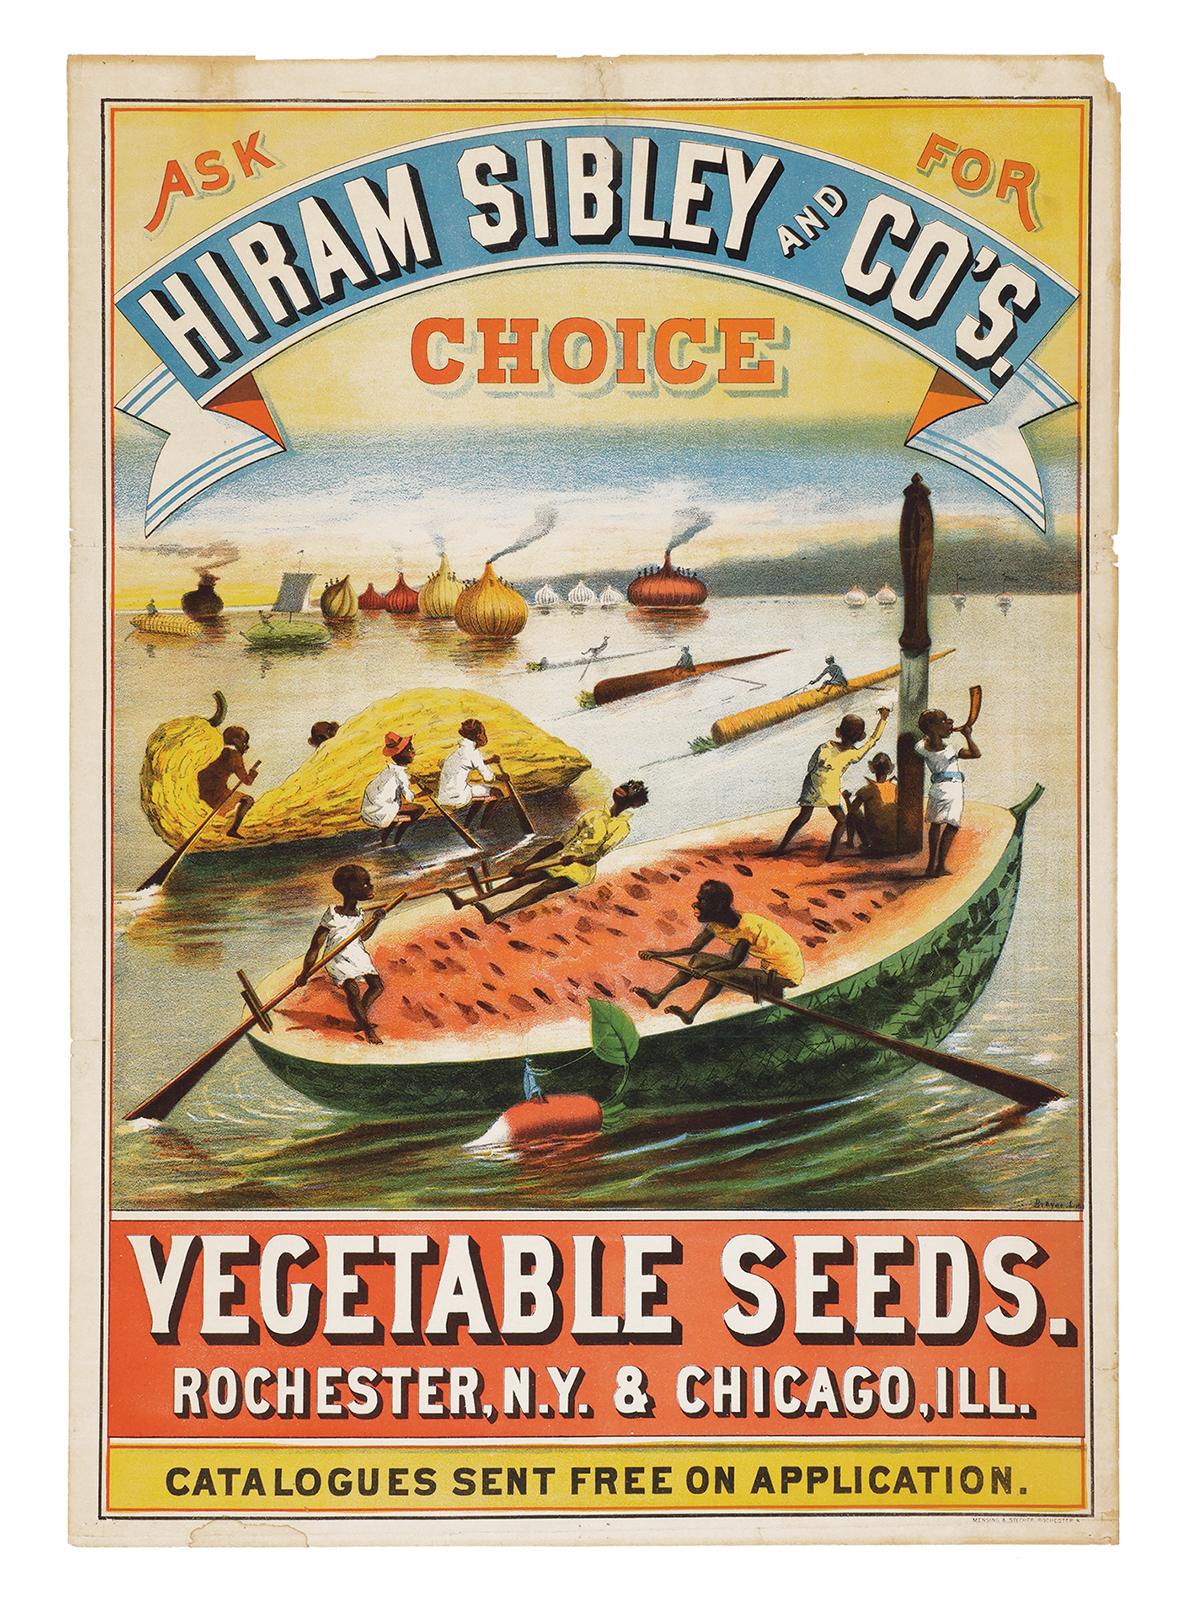 Vegetable Seeds – The Incredible Seed Company Ltd